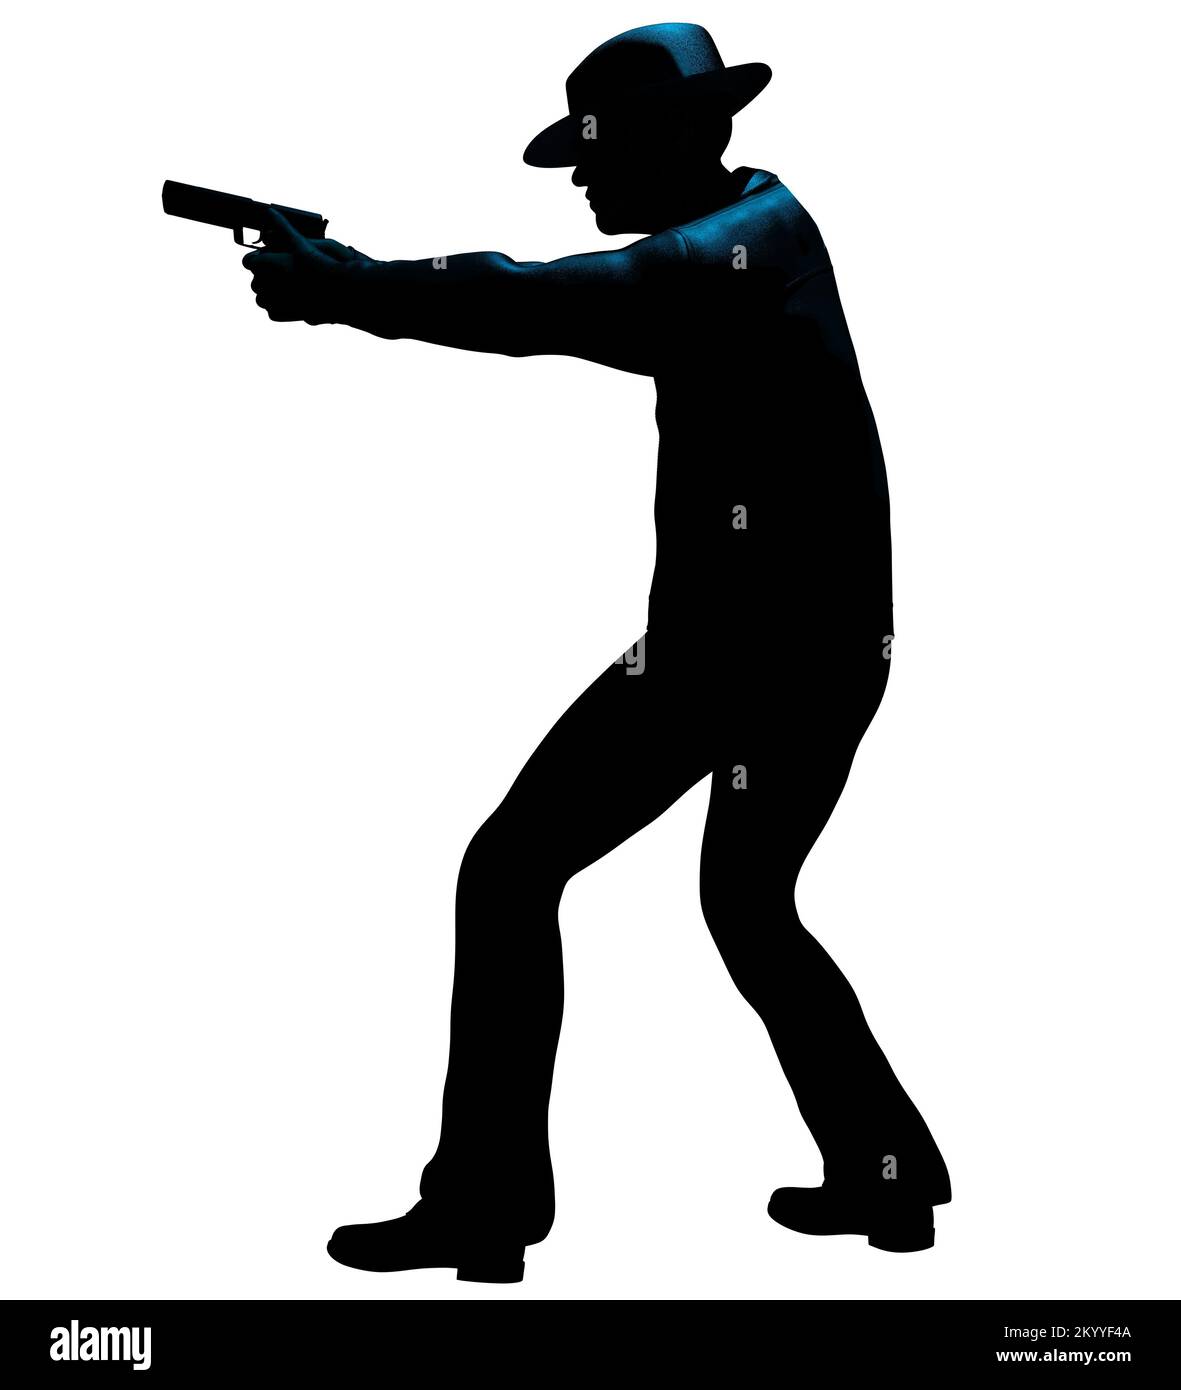 Isolated 3d render illustration of male detective or mobster with gun silhouette walking side view on white background. Stock Photo